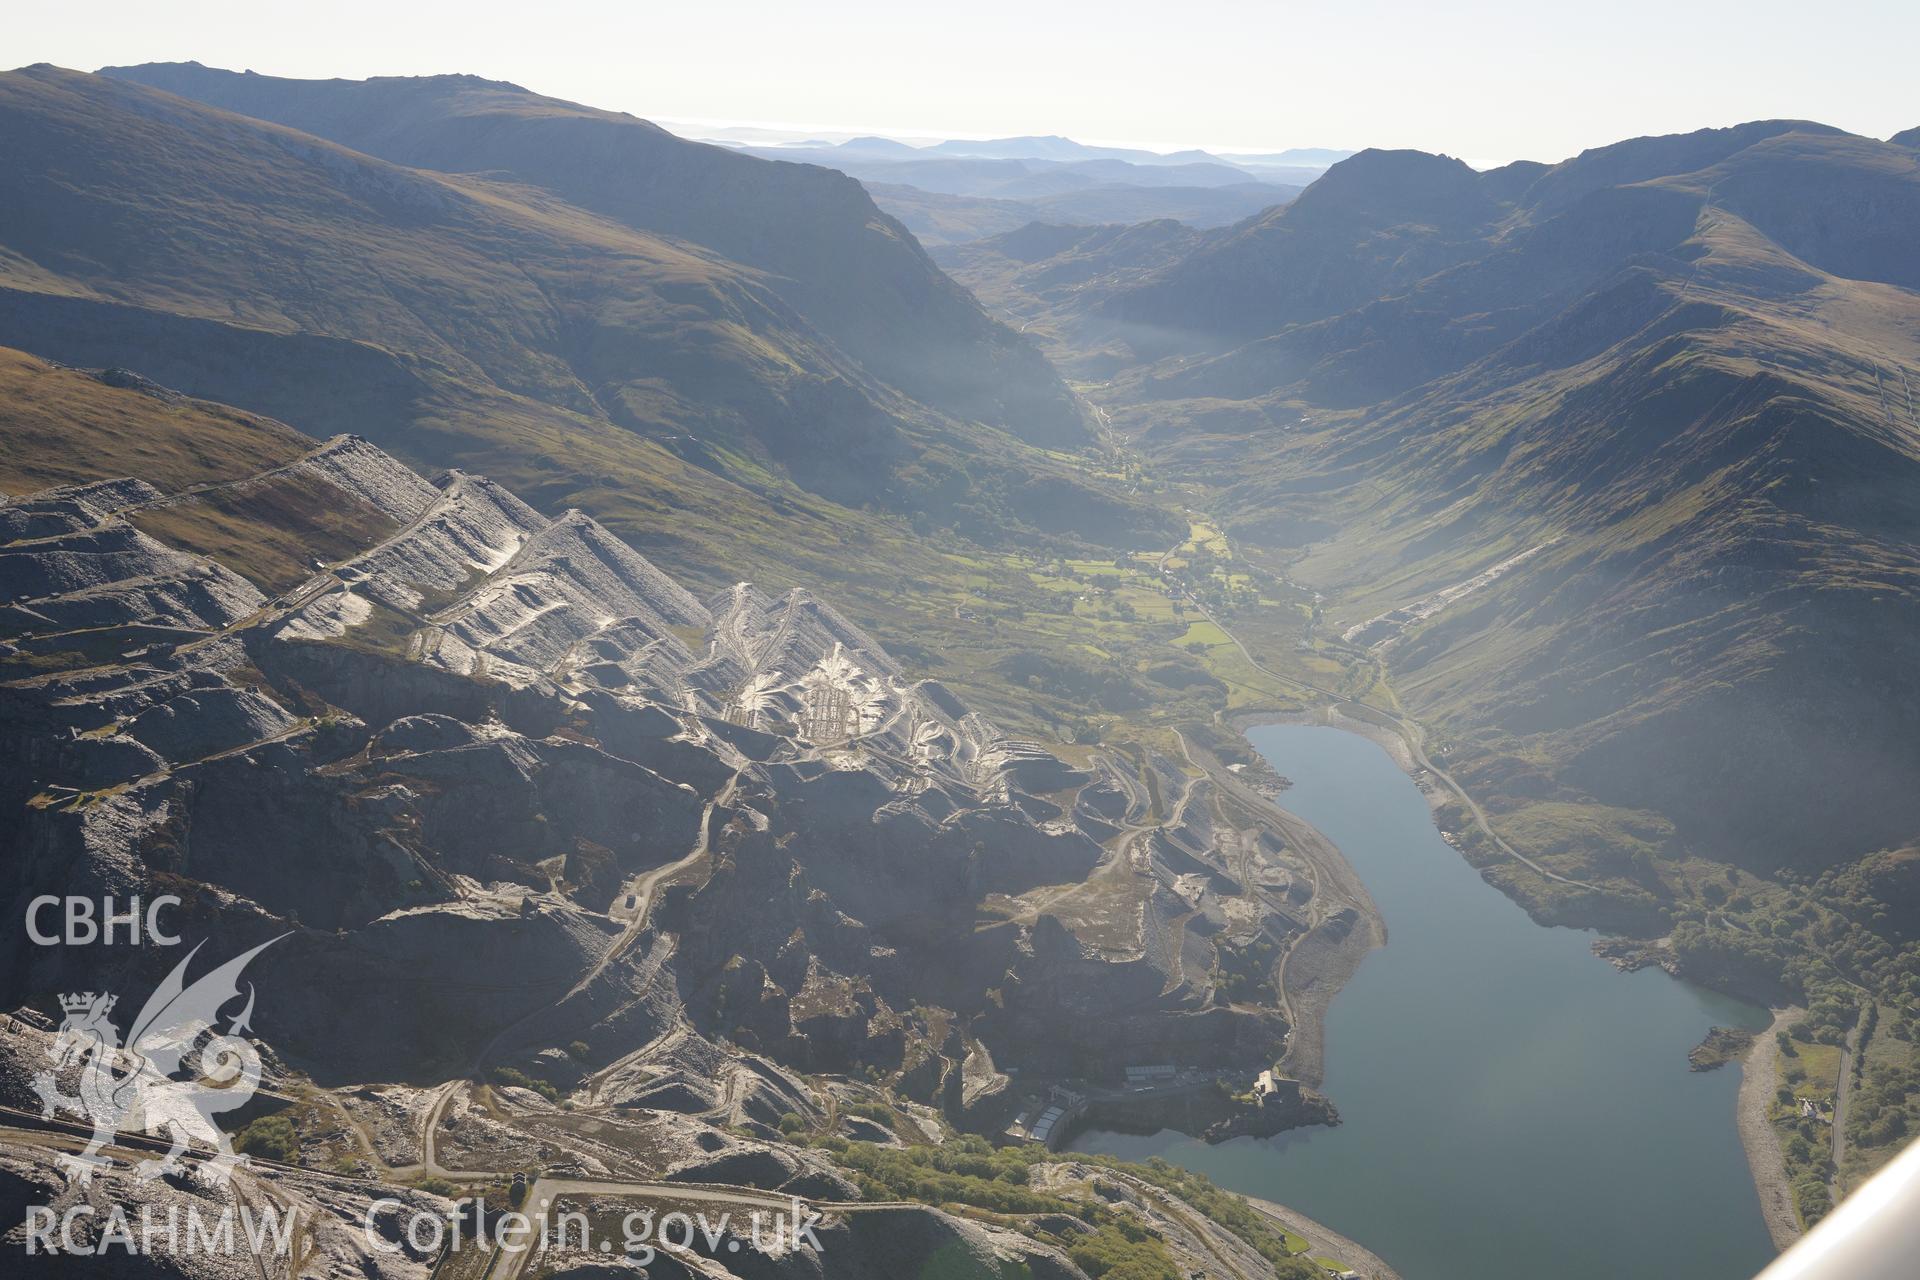 Dinorwig slate quarry and 'Electric Mountain' pumped-storage hydro-electric power station, near Llanberis. Oblique aerial photograph taken during the Royal Commission's programme of archaeological aerial reconnaissance by Toby Driver on 2nd October 2015.